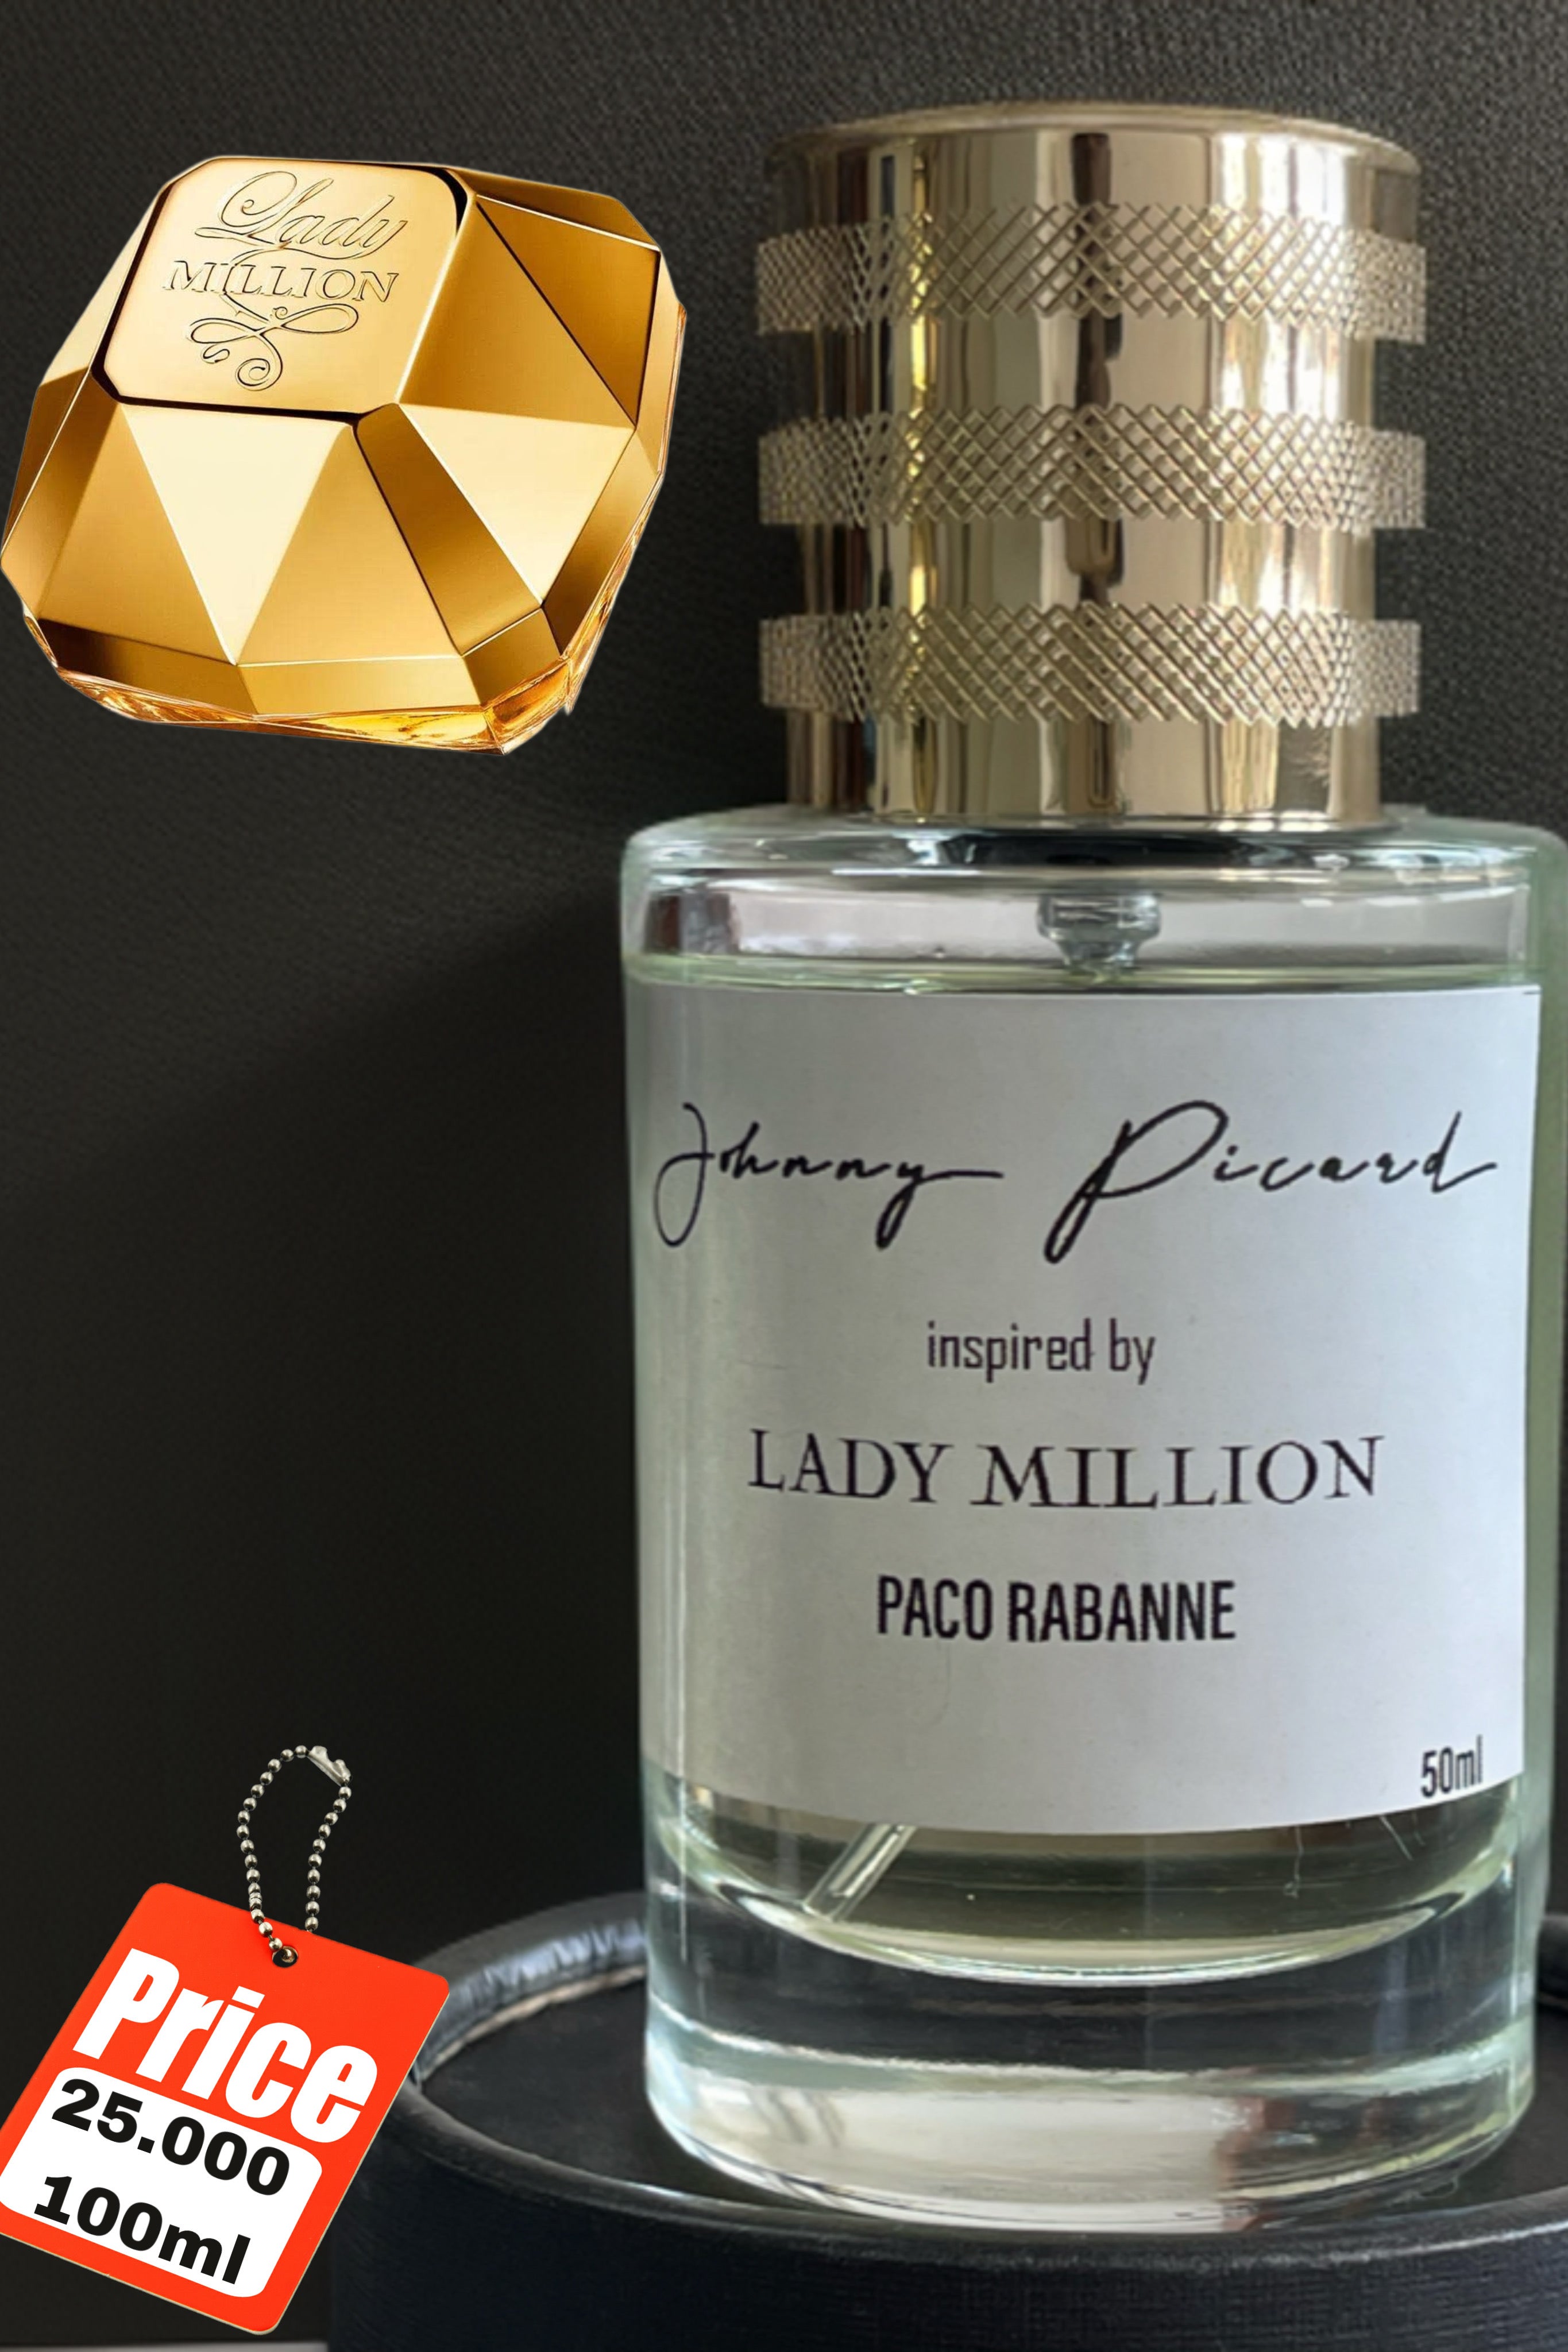 johnny picard inspired by lady milion  PACO RABANNE